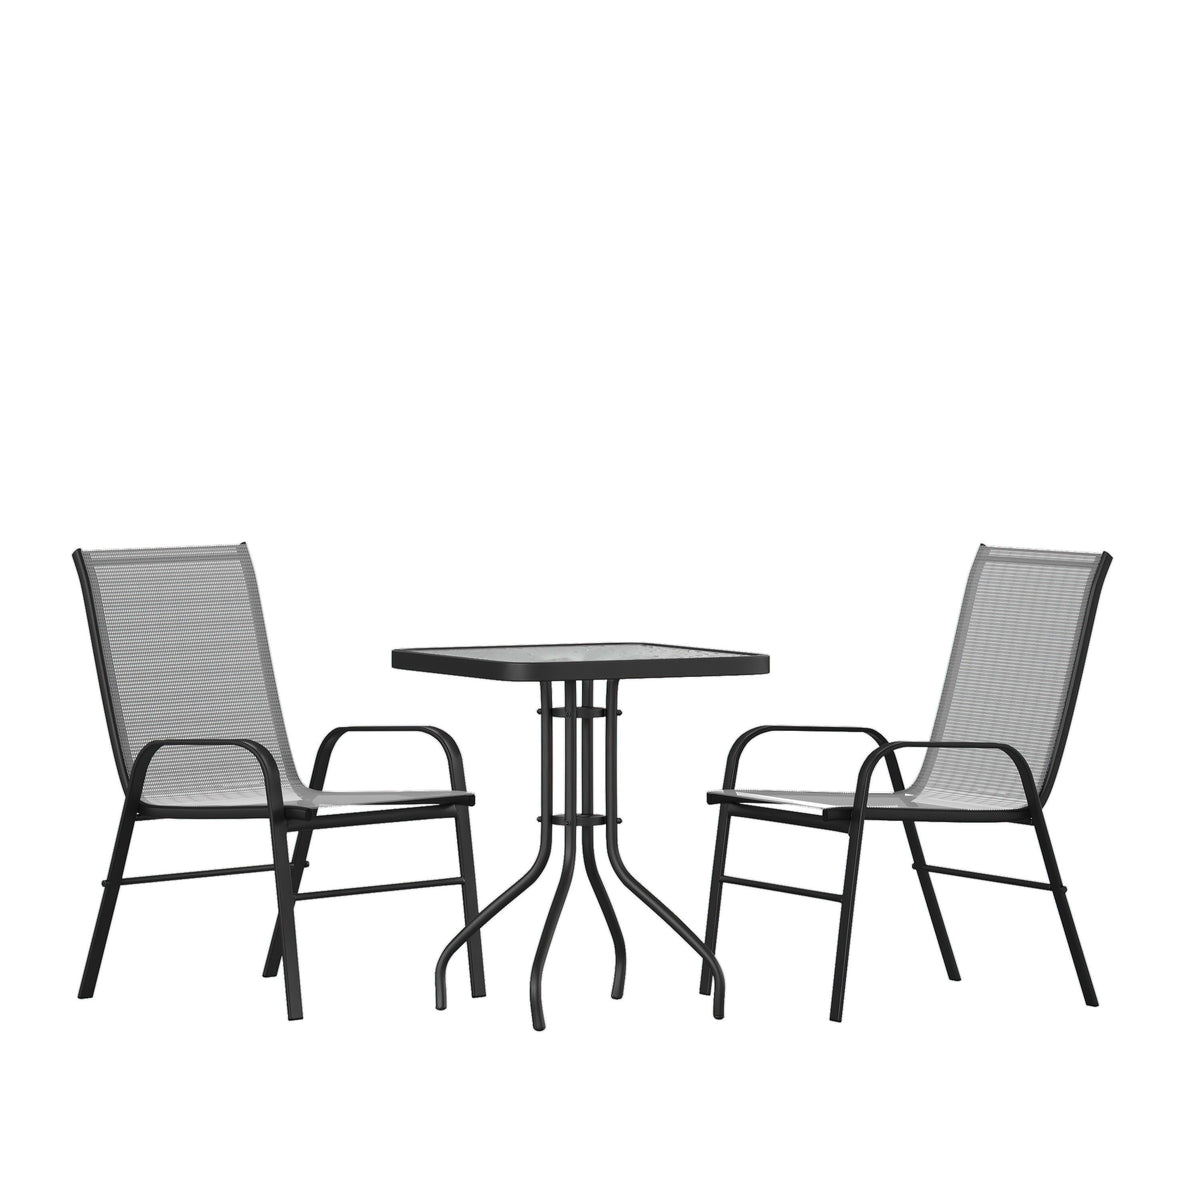 Gray |#| 3 Piece Patio Dining Set - 23.5inch Square Glass Table, 2 Gray Flex Stack Chairs